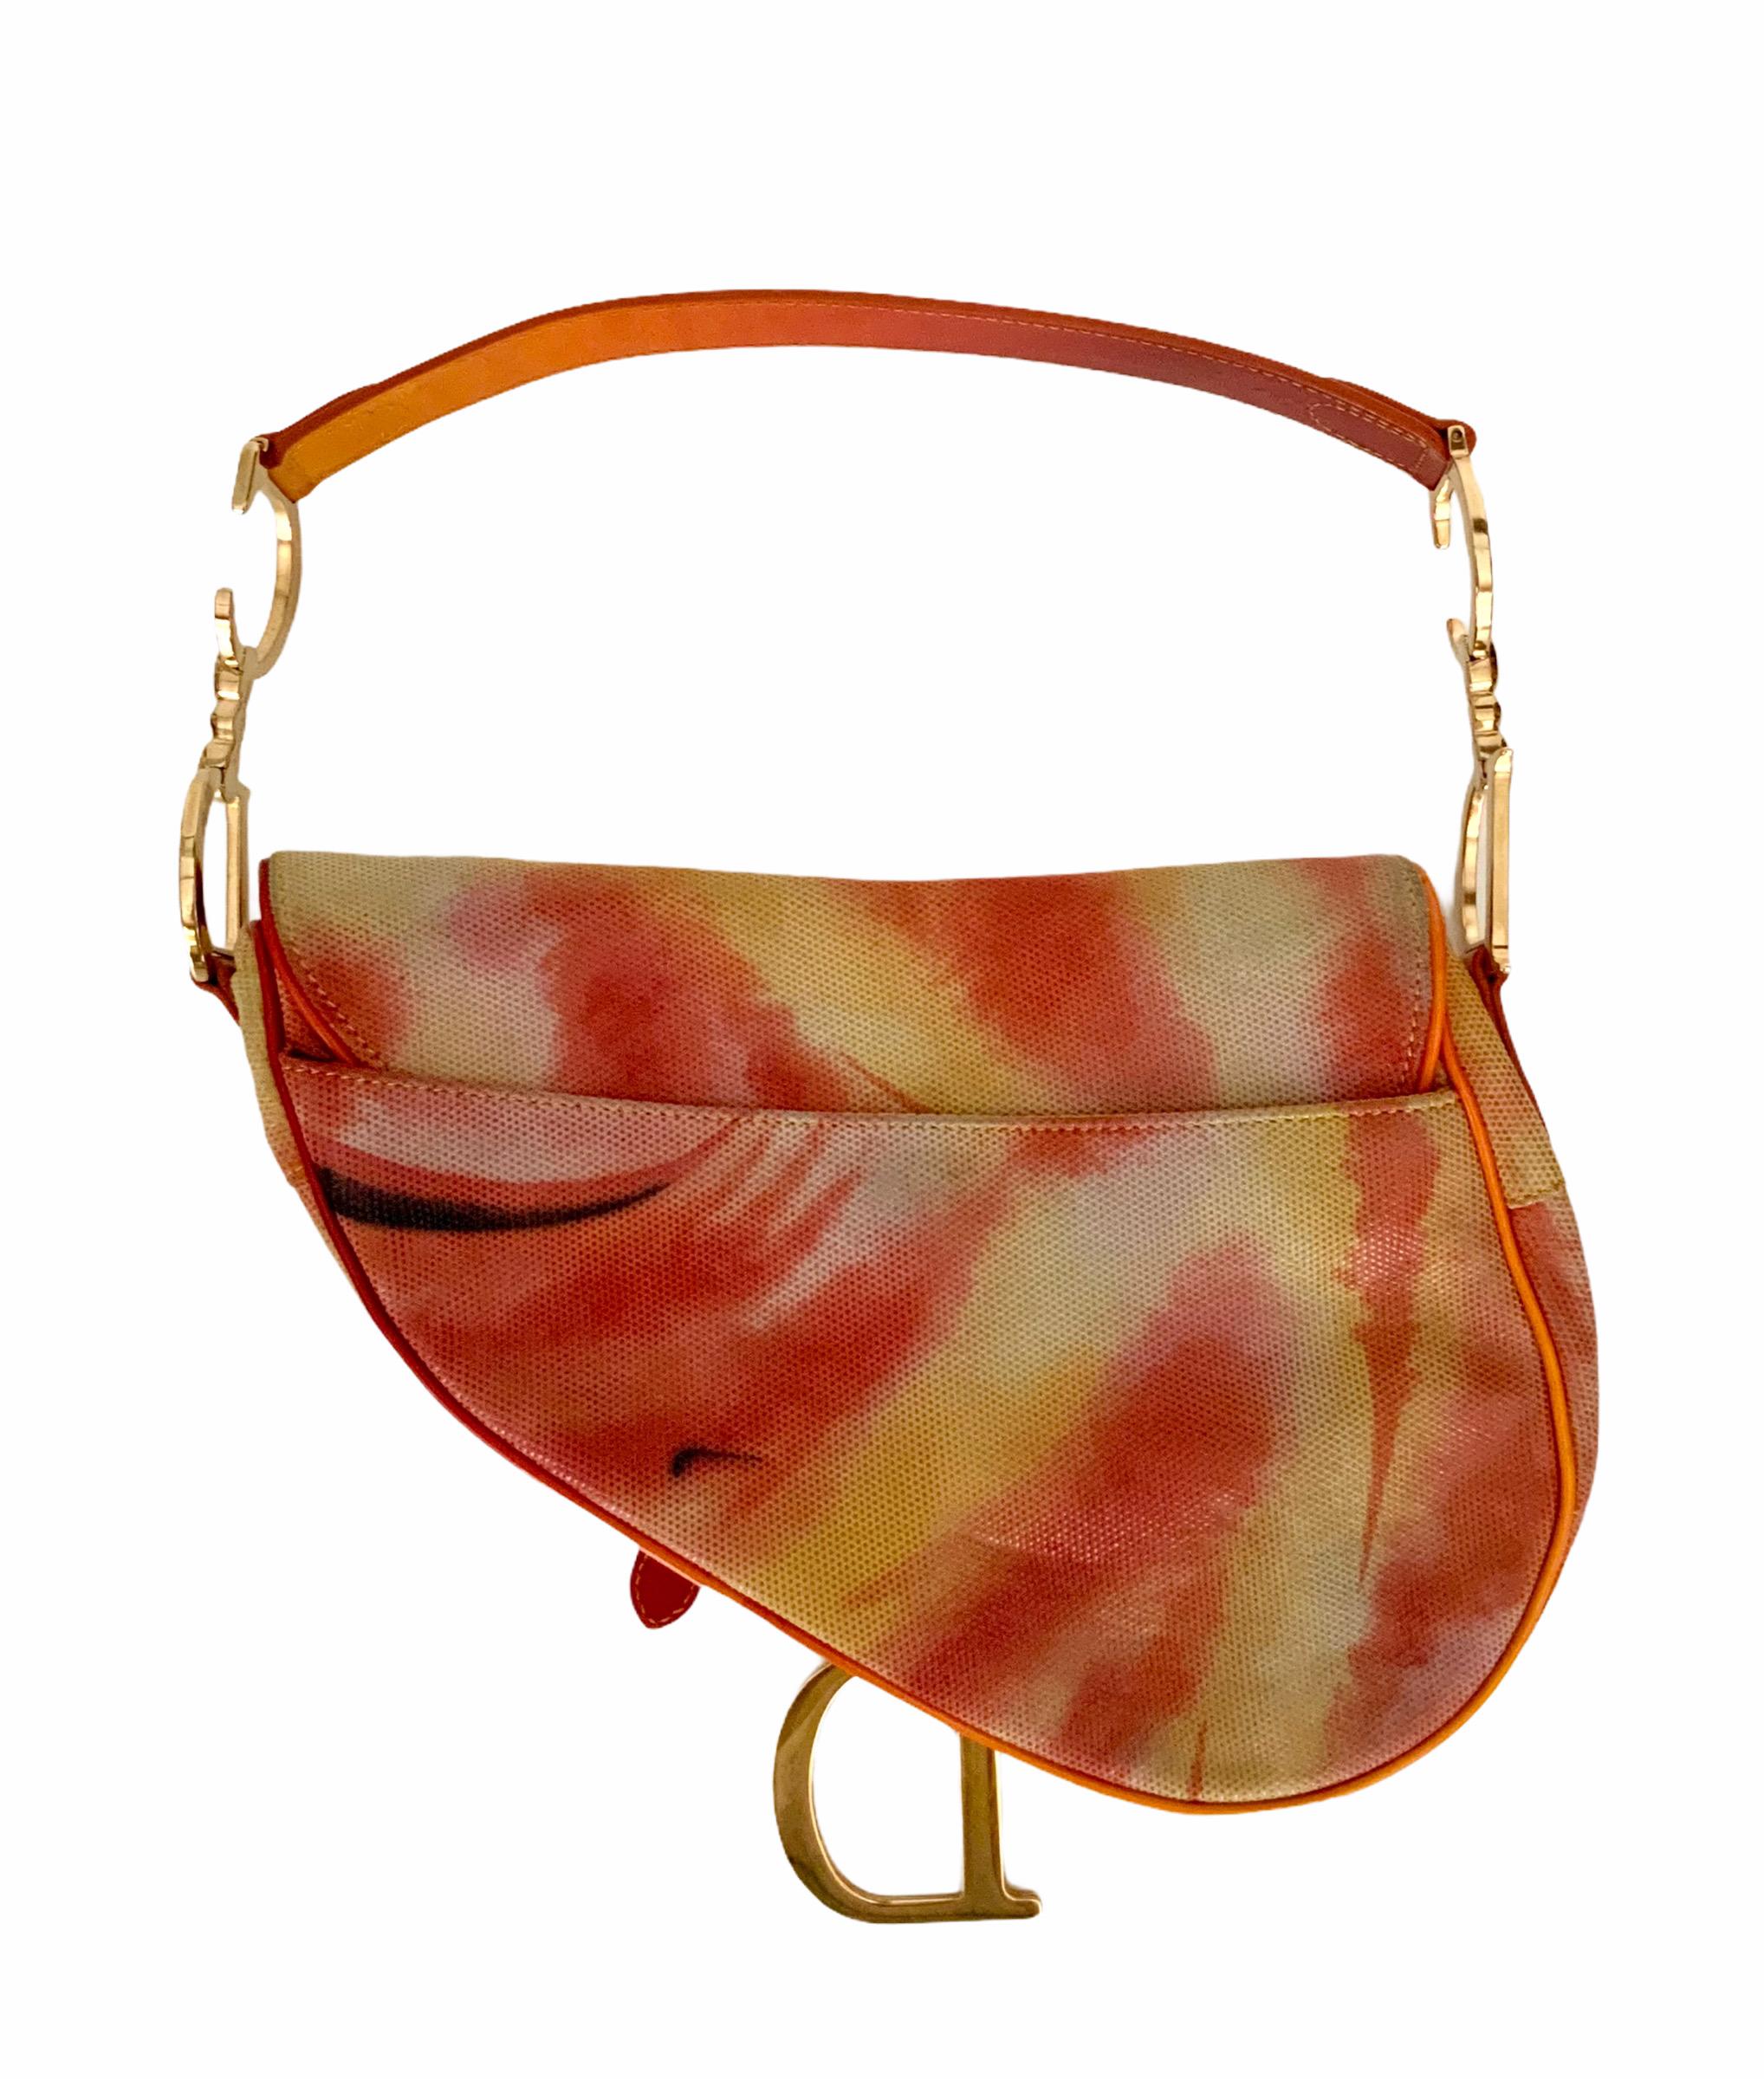 This iconic saddle bag from the house of Christian Dior was designed by John Galliano. 
It is pre-owned but in perfect condition.
It is crafted of shimmering pixelated Tie & Dye orange print leather with patent leather trim.
It features a flat color